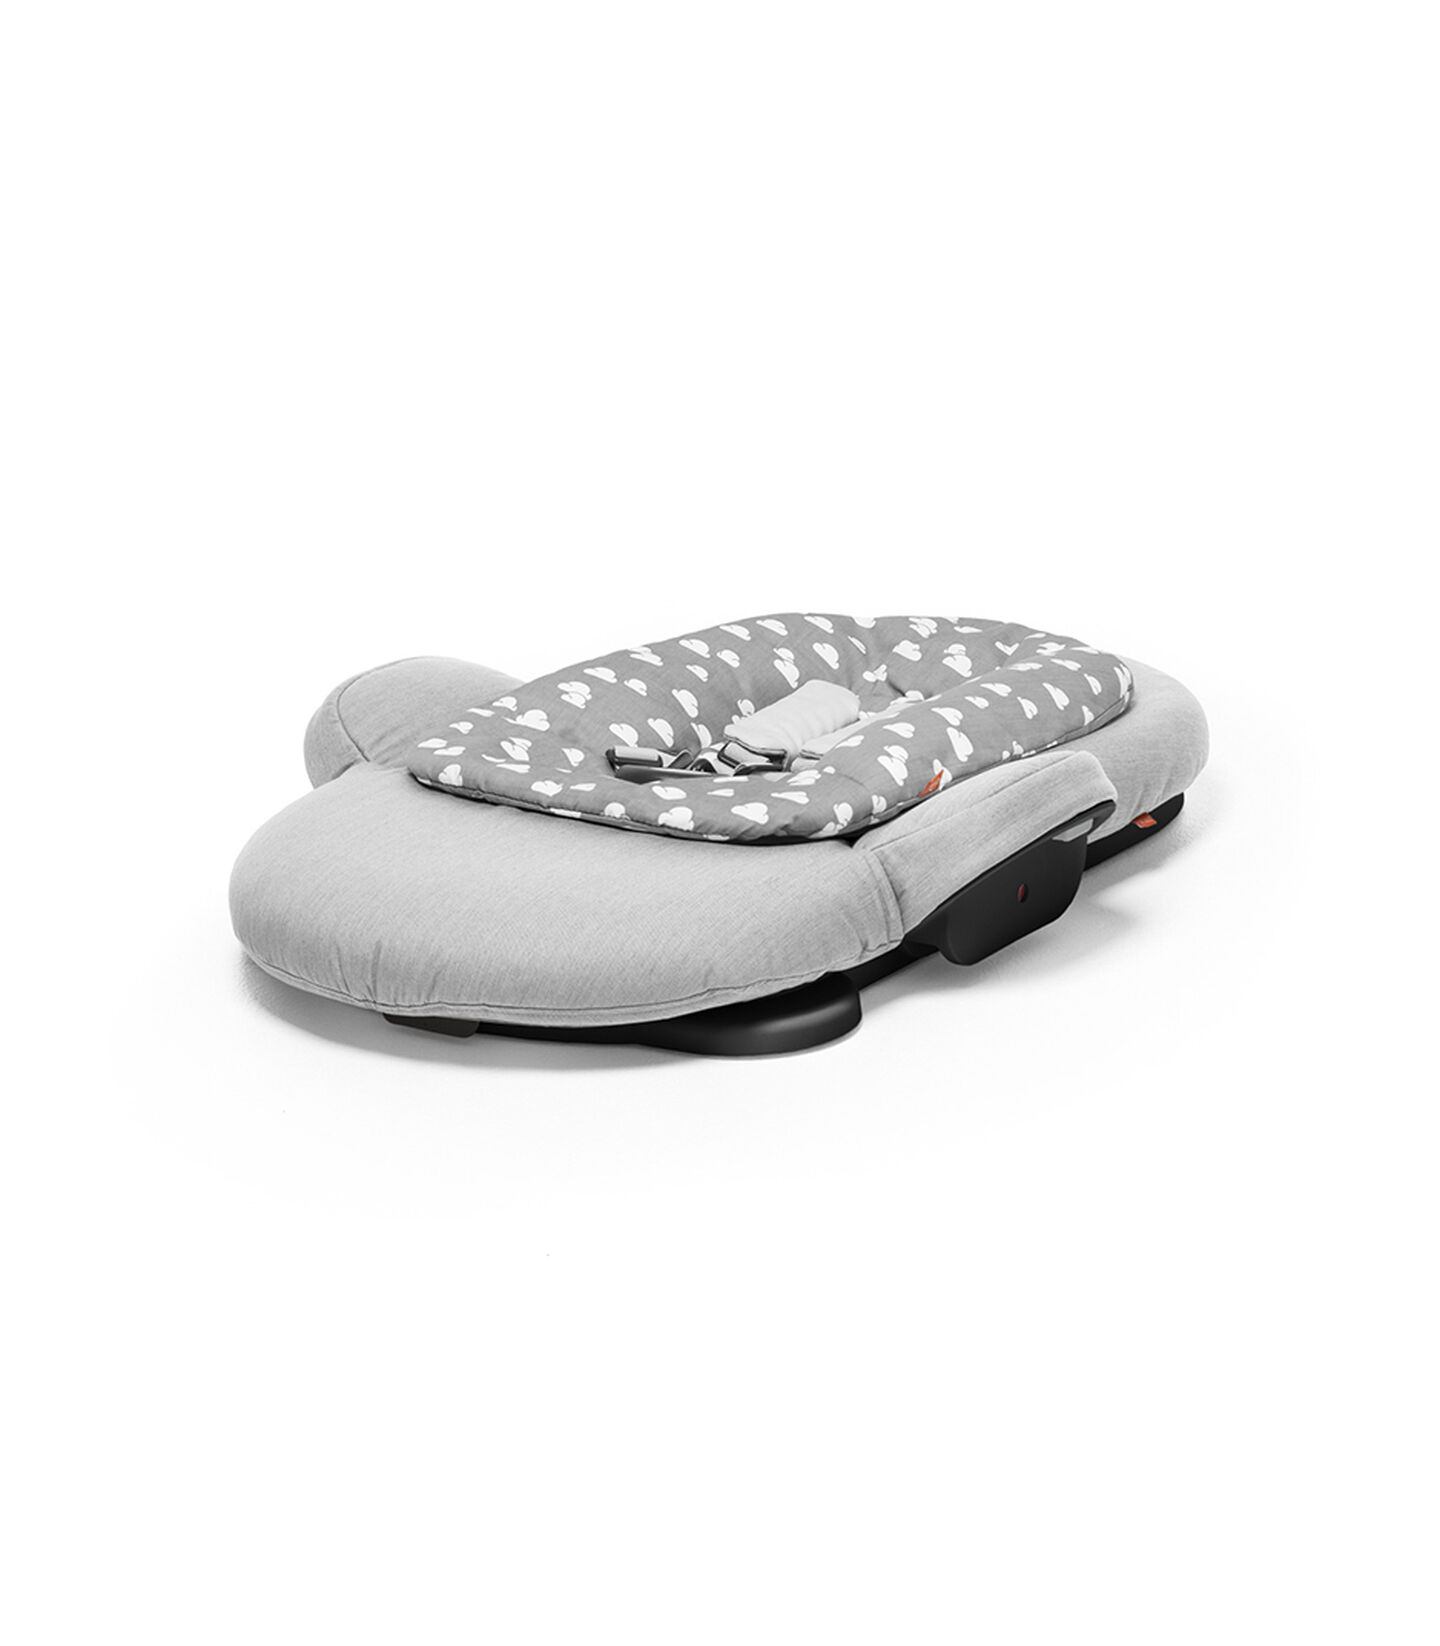 Stokke® Steps™ Hamaca Grey Clouds, Grey Clouds, mainview view 3